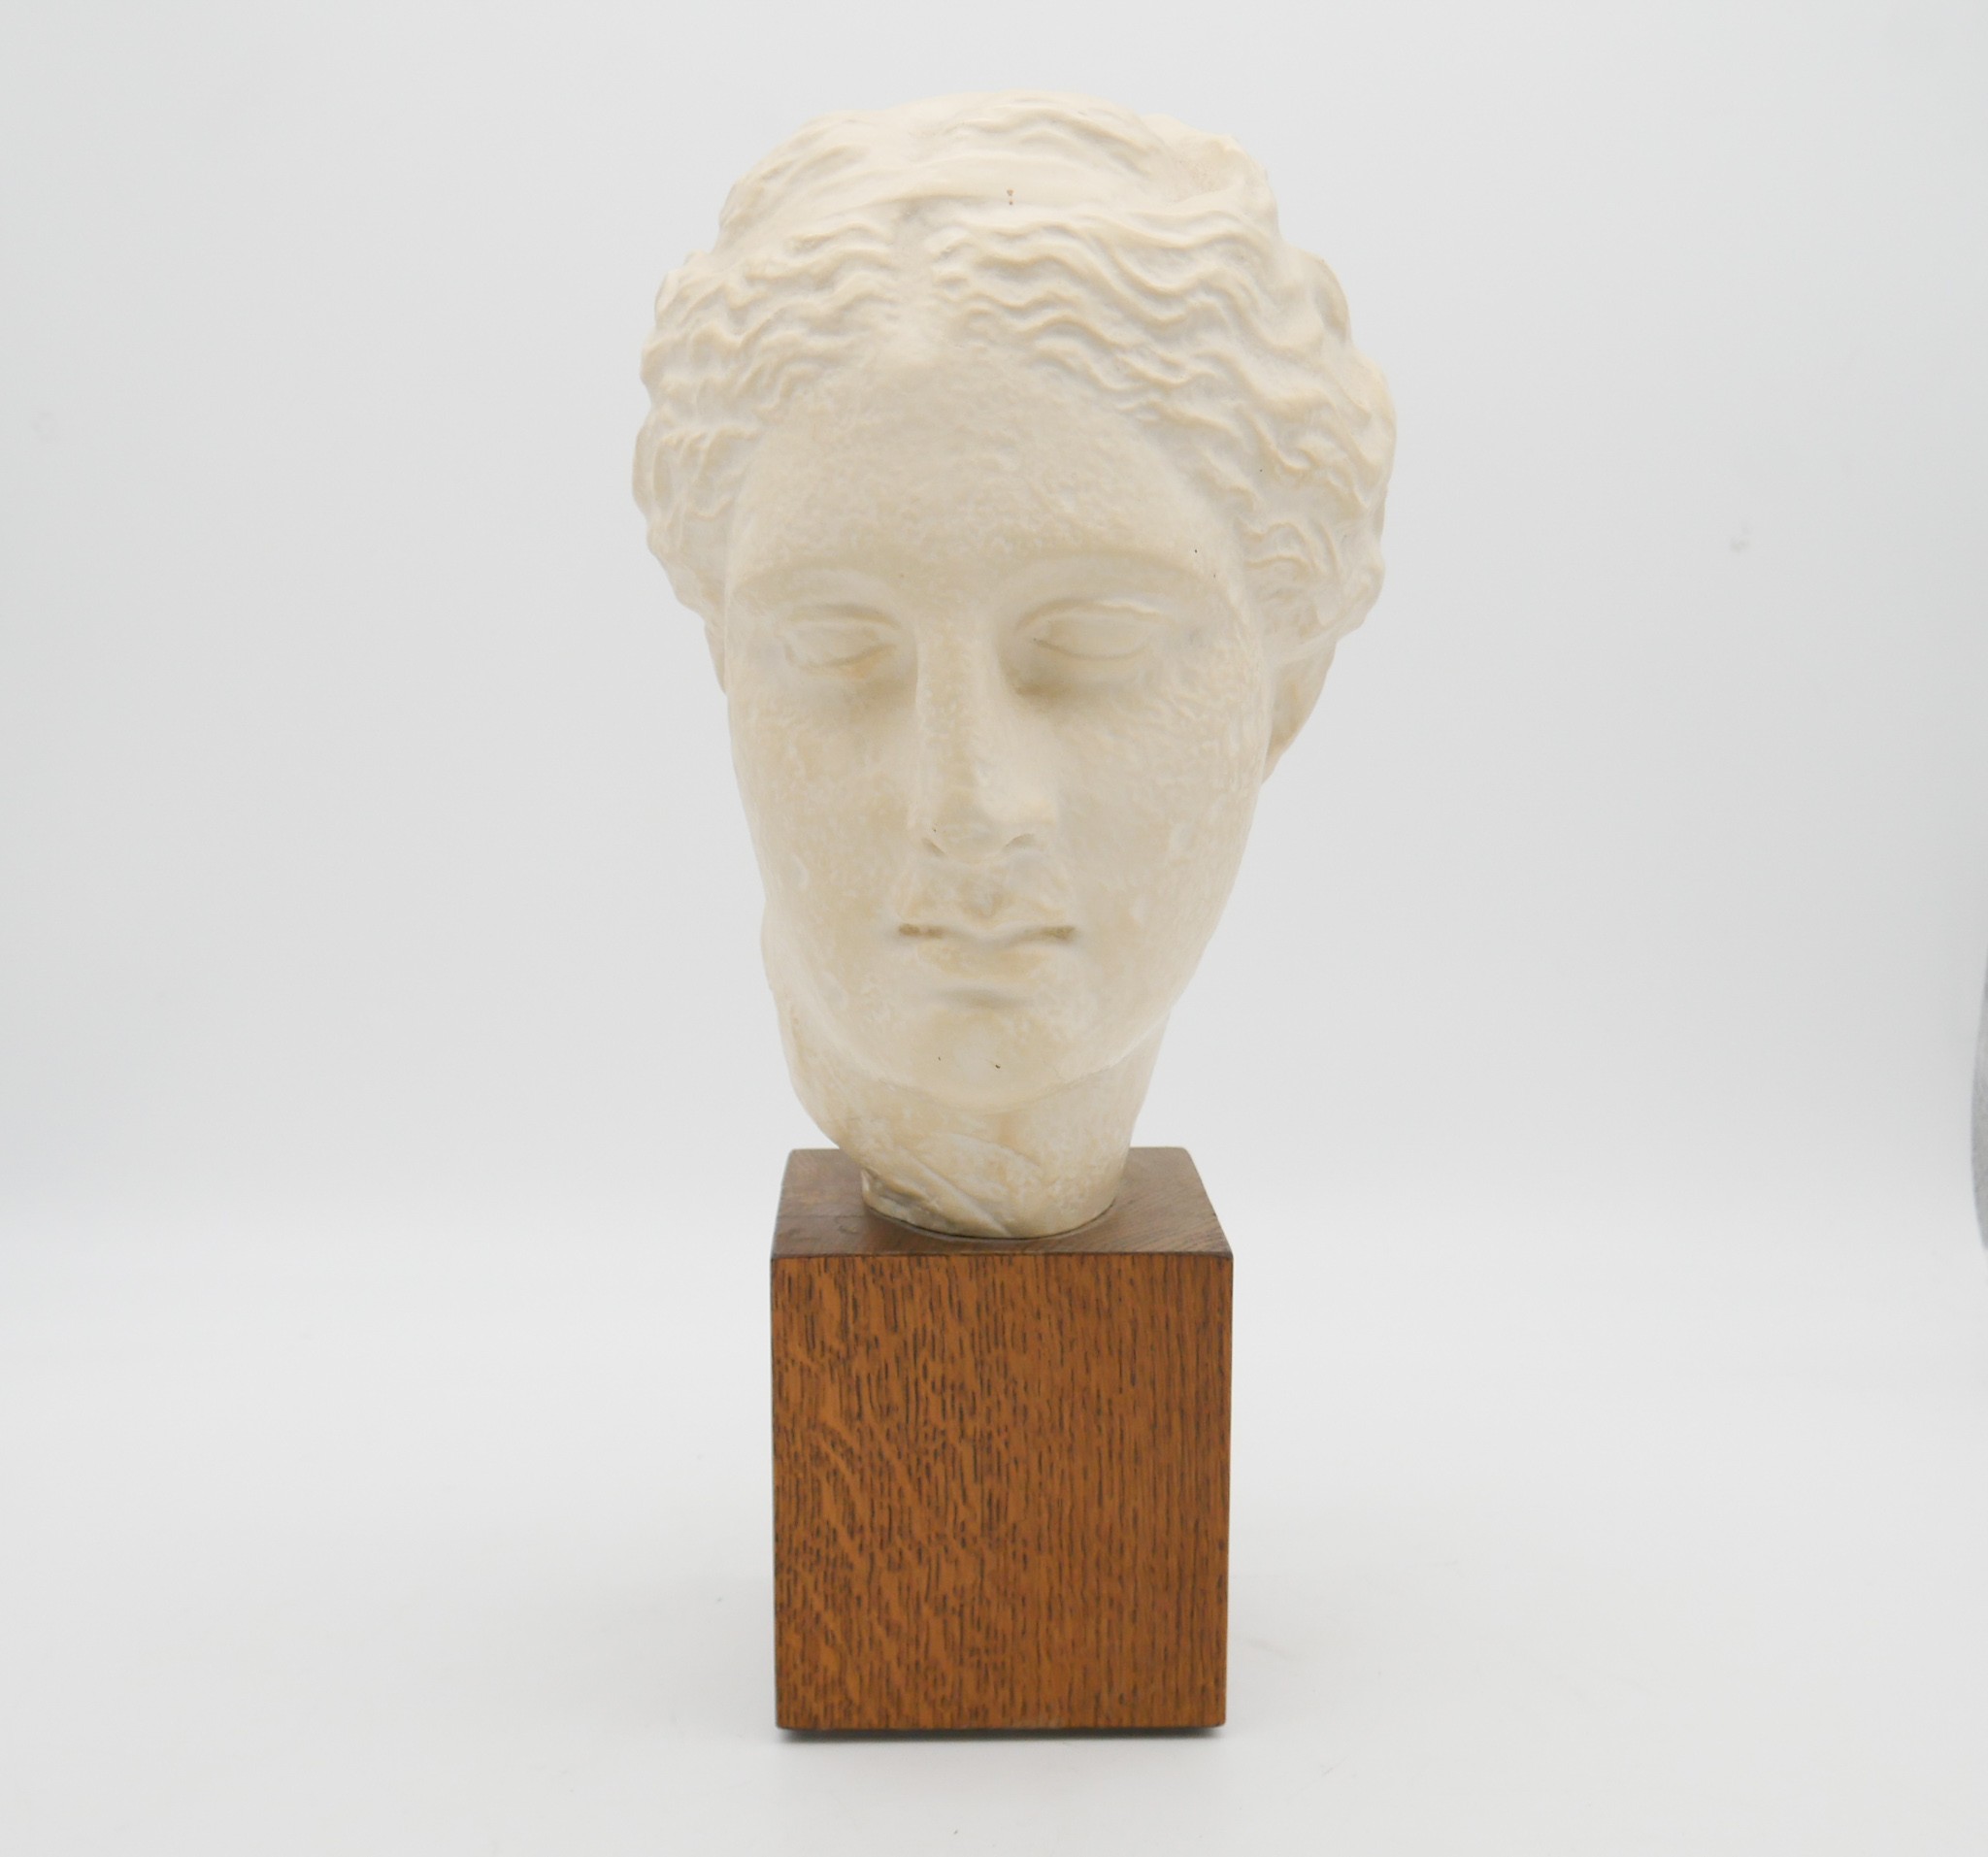 A museum reproduction of an Ancient Greek sculpture of the head of Hygeia, Greek Goddess of